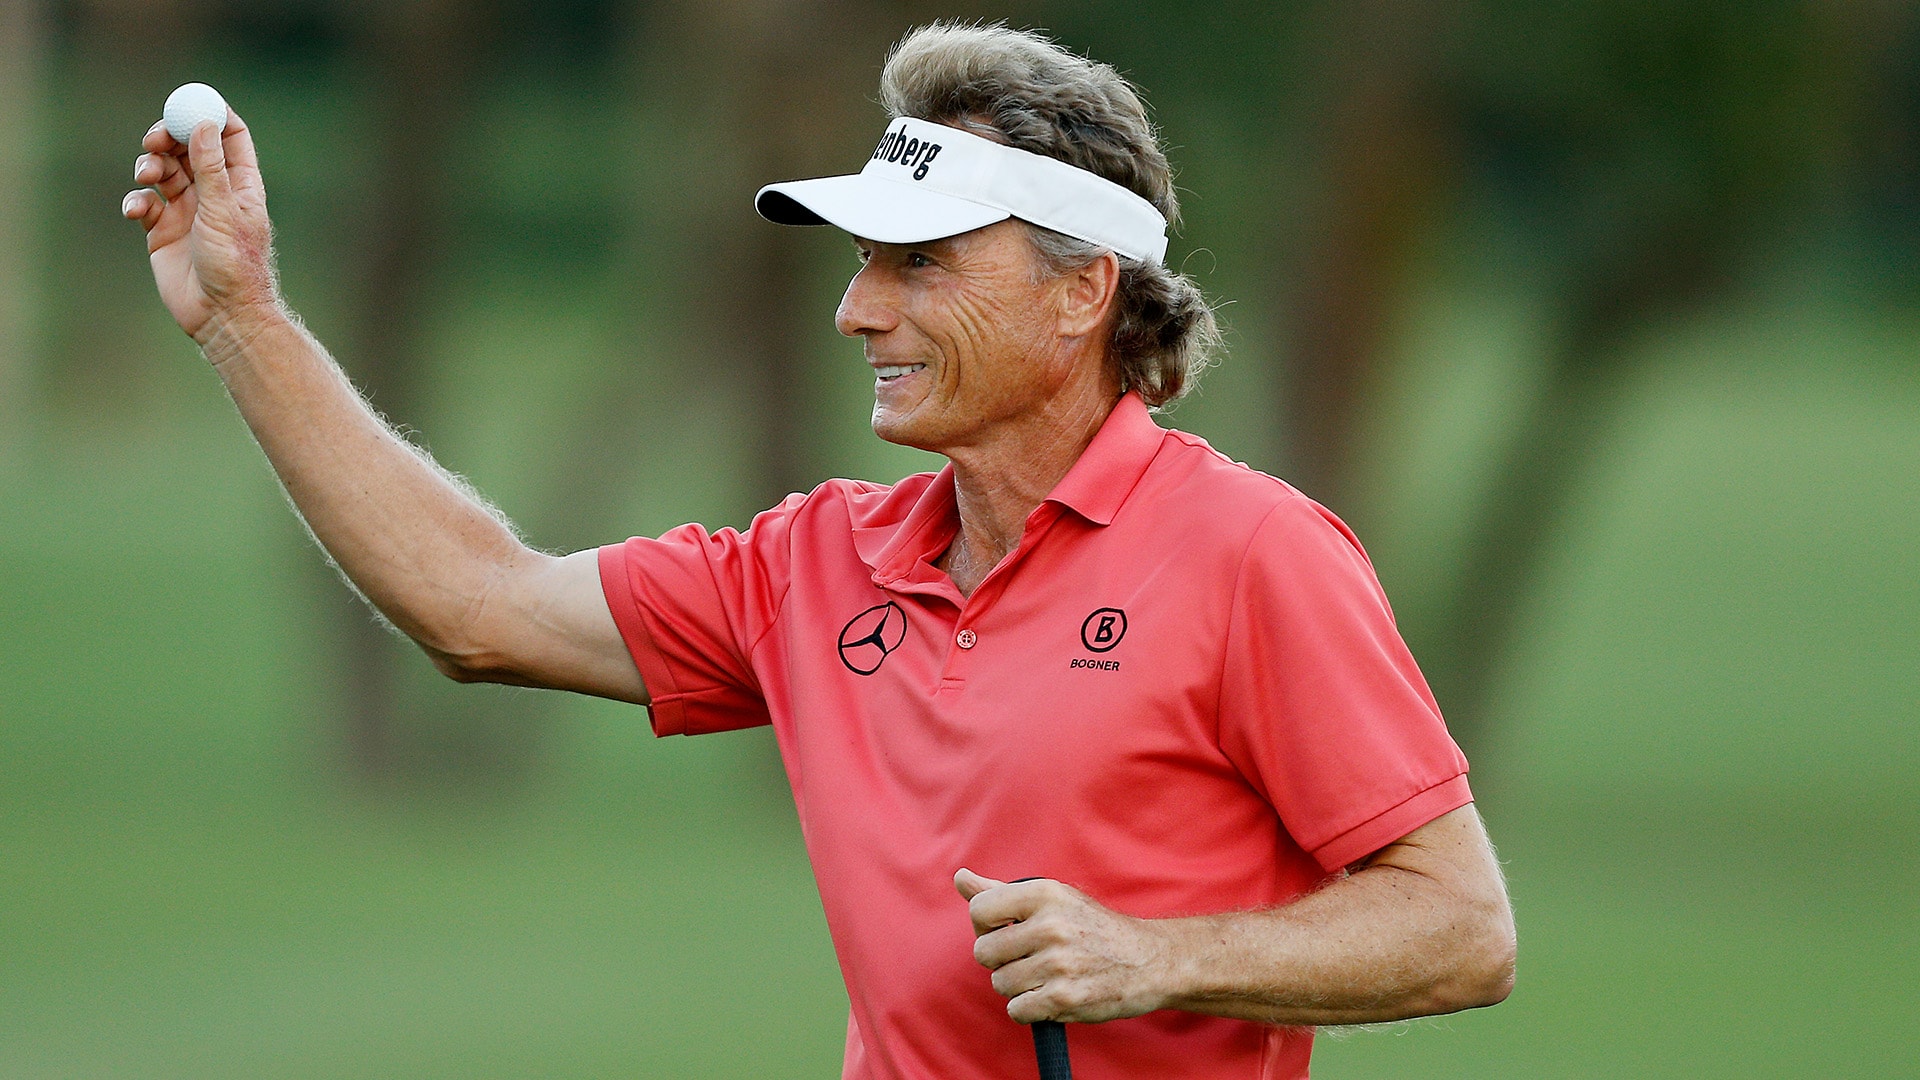 Langer Has Irwin's 45 Senior Wins Within His Reach